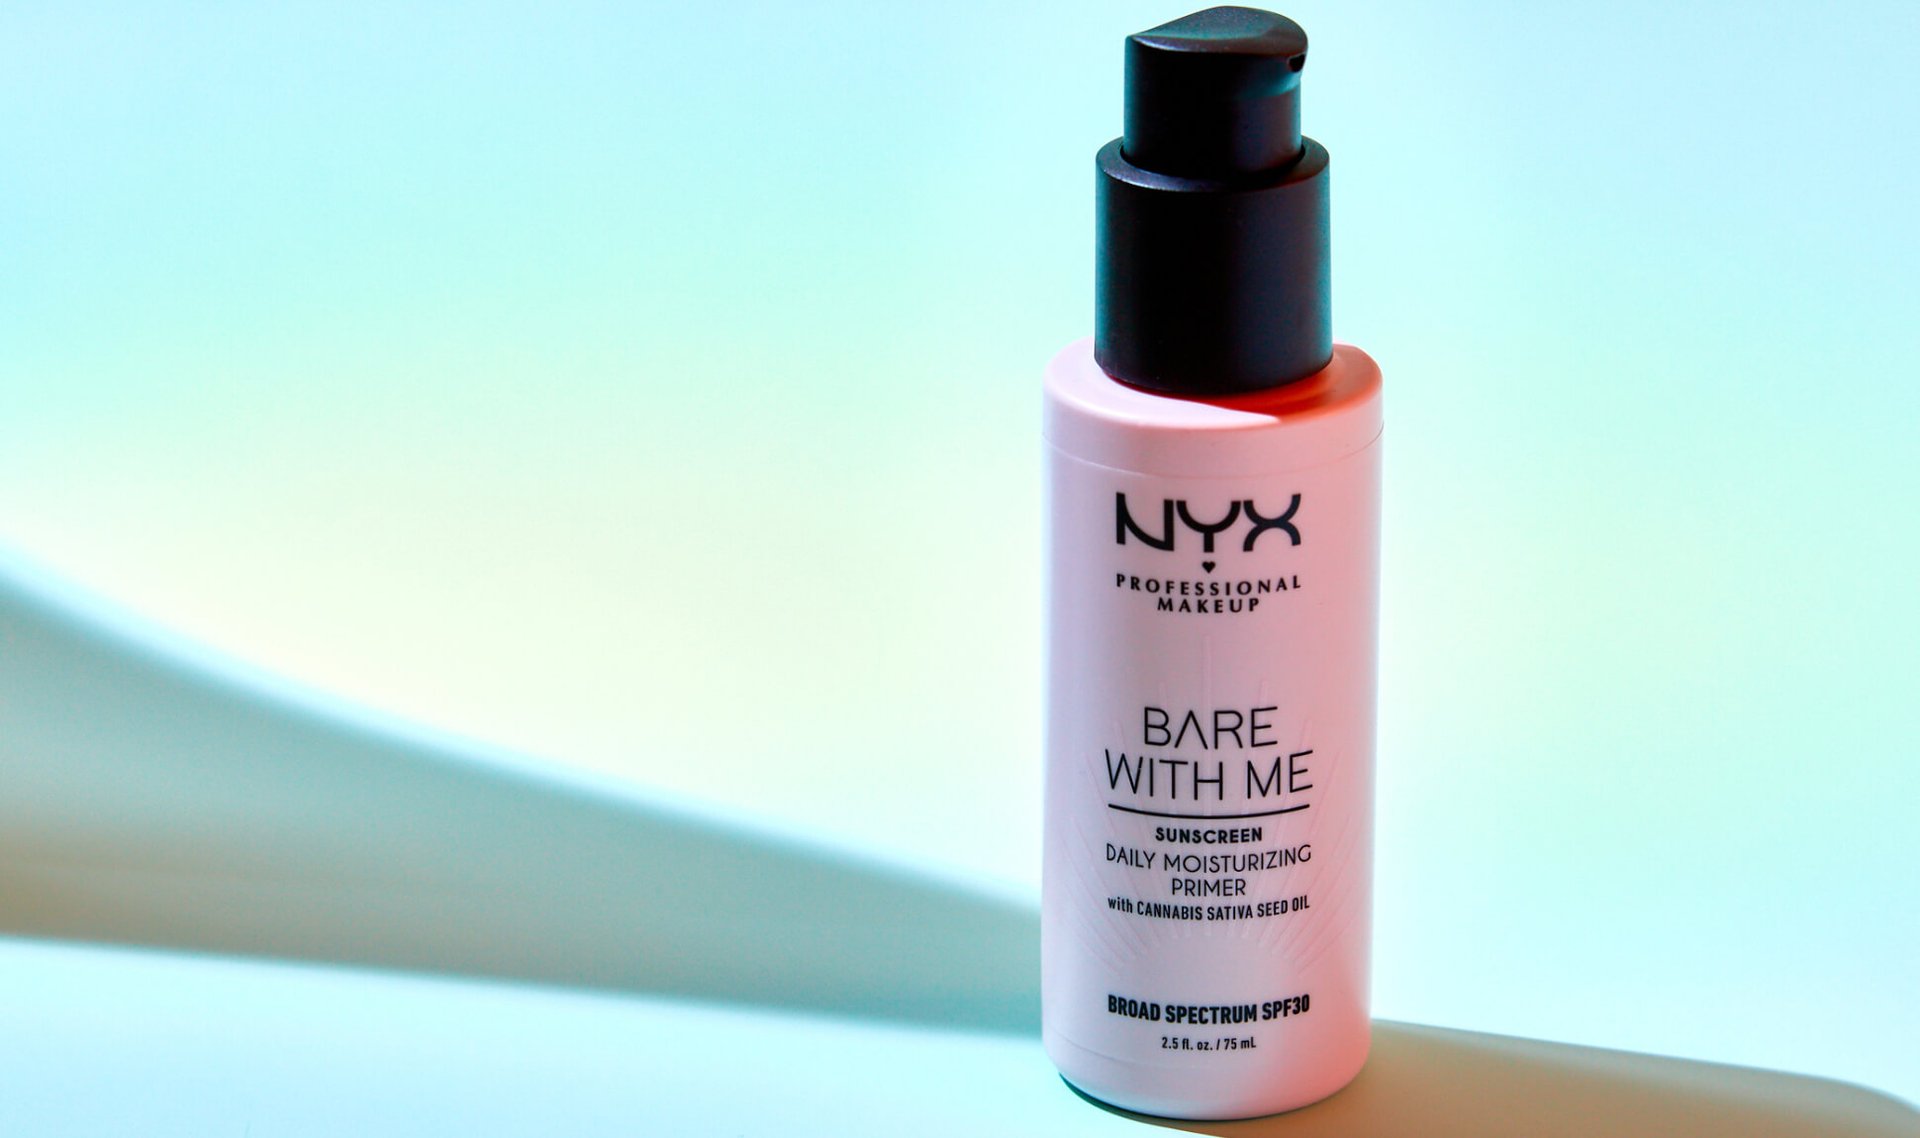 Why I Won’t Go a Morning Without the NYX Cosmetic’s Bare With Me Cannabis Sativa Seed Oil Moisturizing Primer